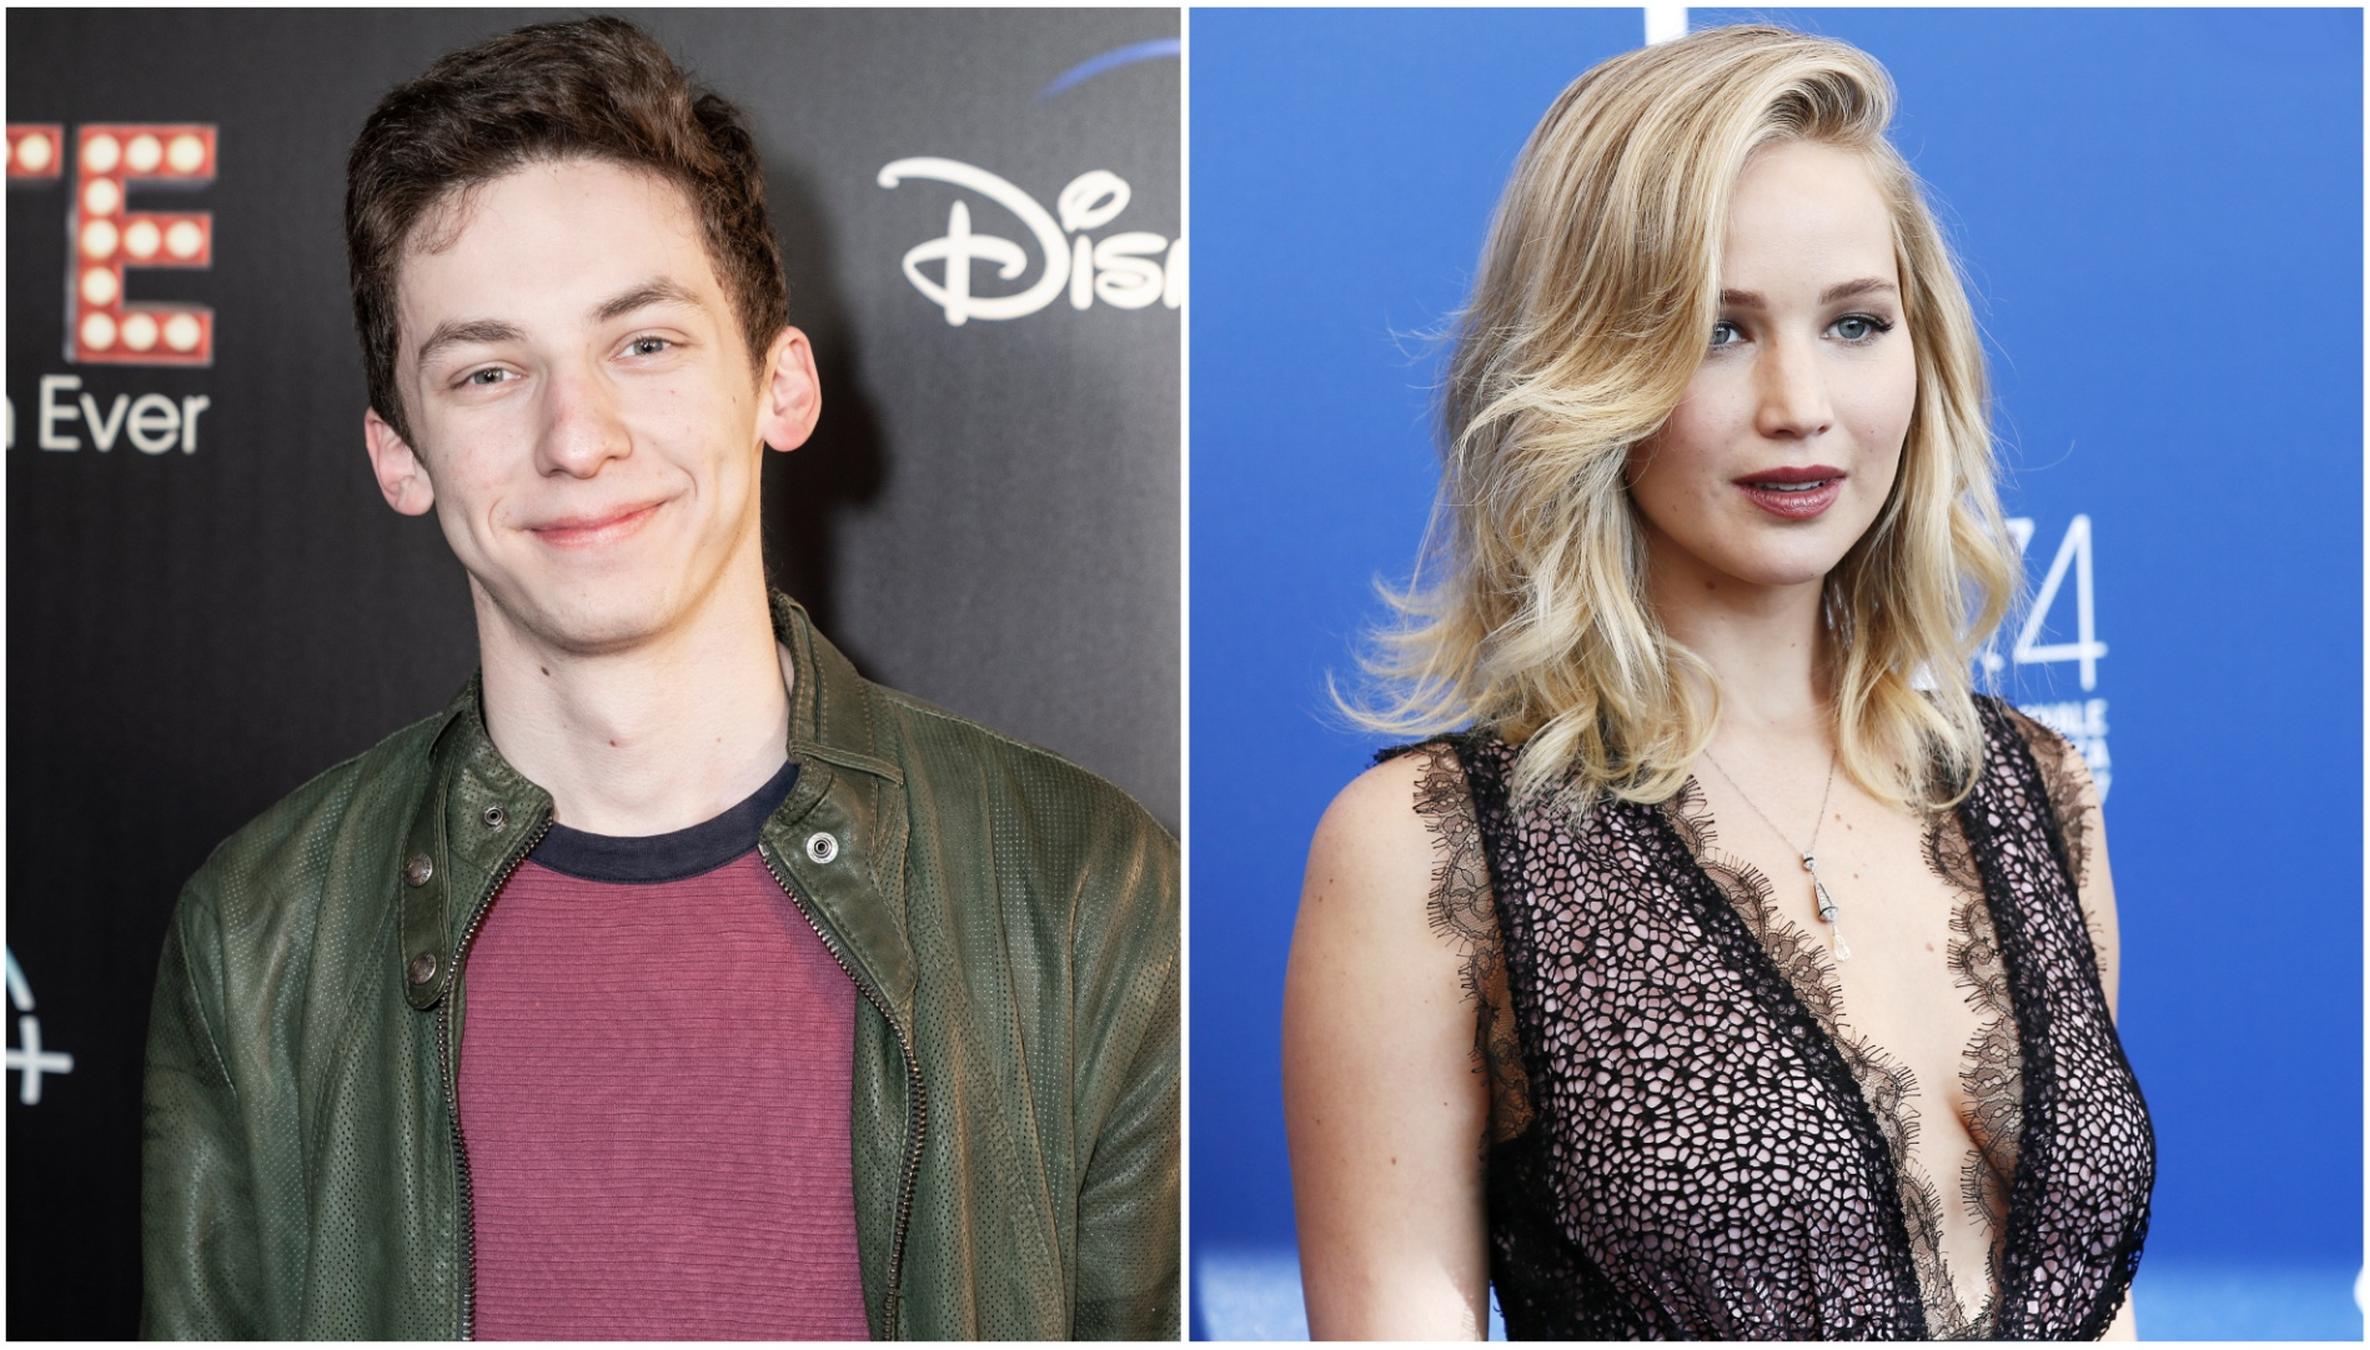 Andrew Barth Feldman and Jennifer Lawrence Will Star in the Sony Comedy